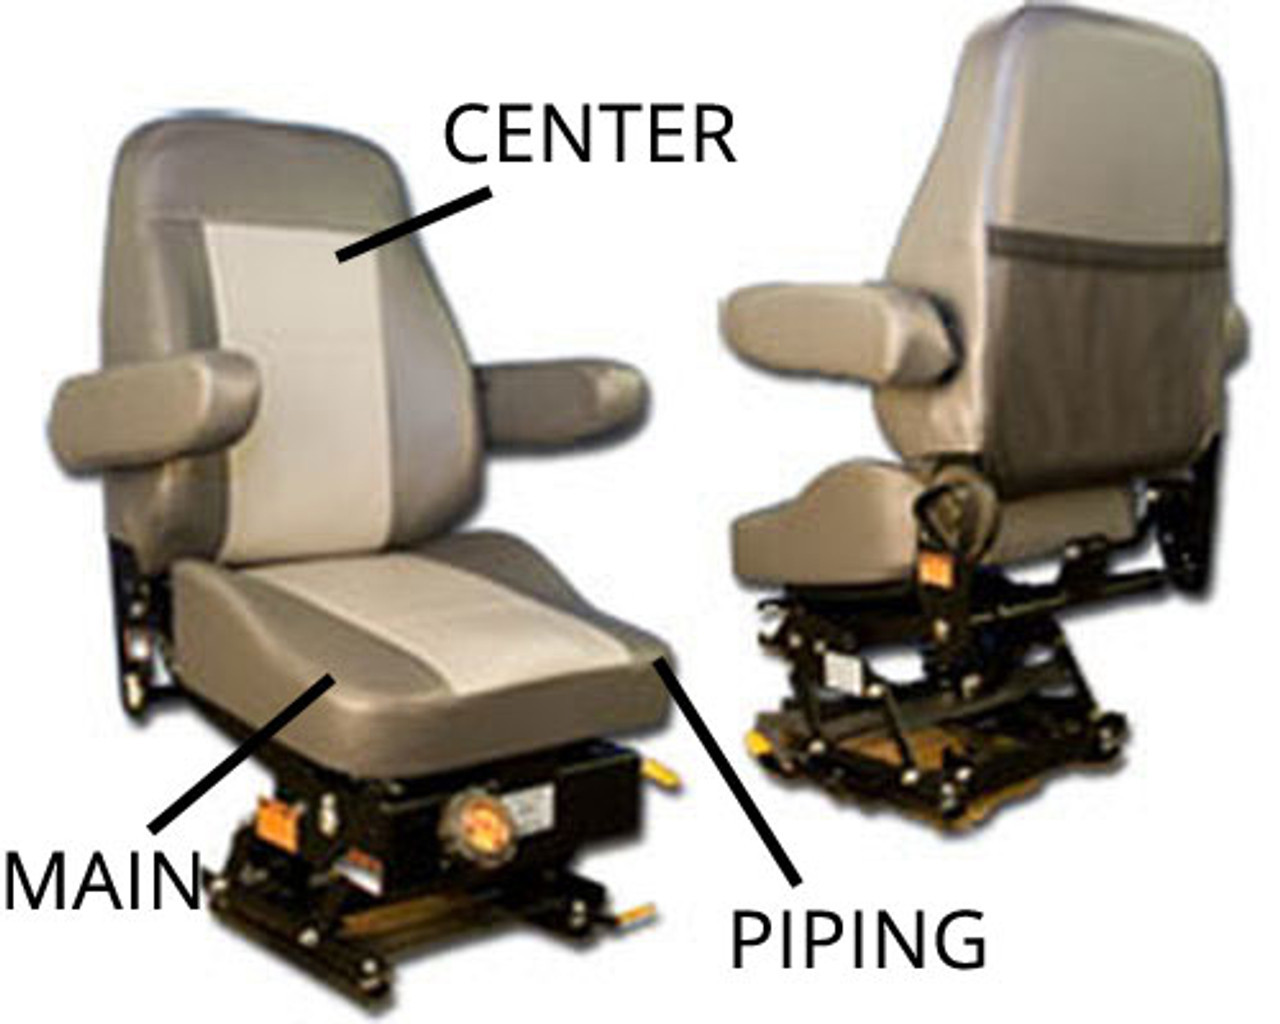 Boat Double Seat, Boat Seats With Arm Rests